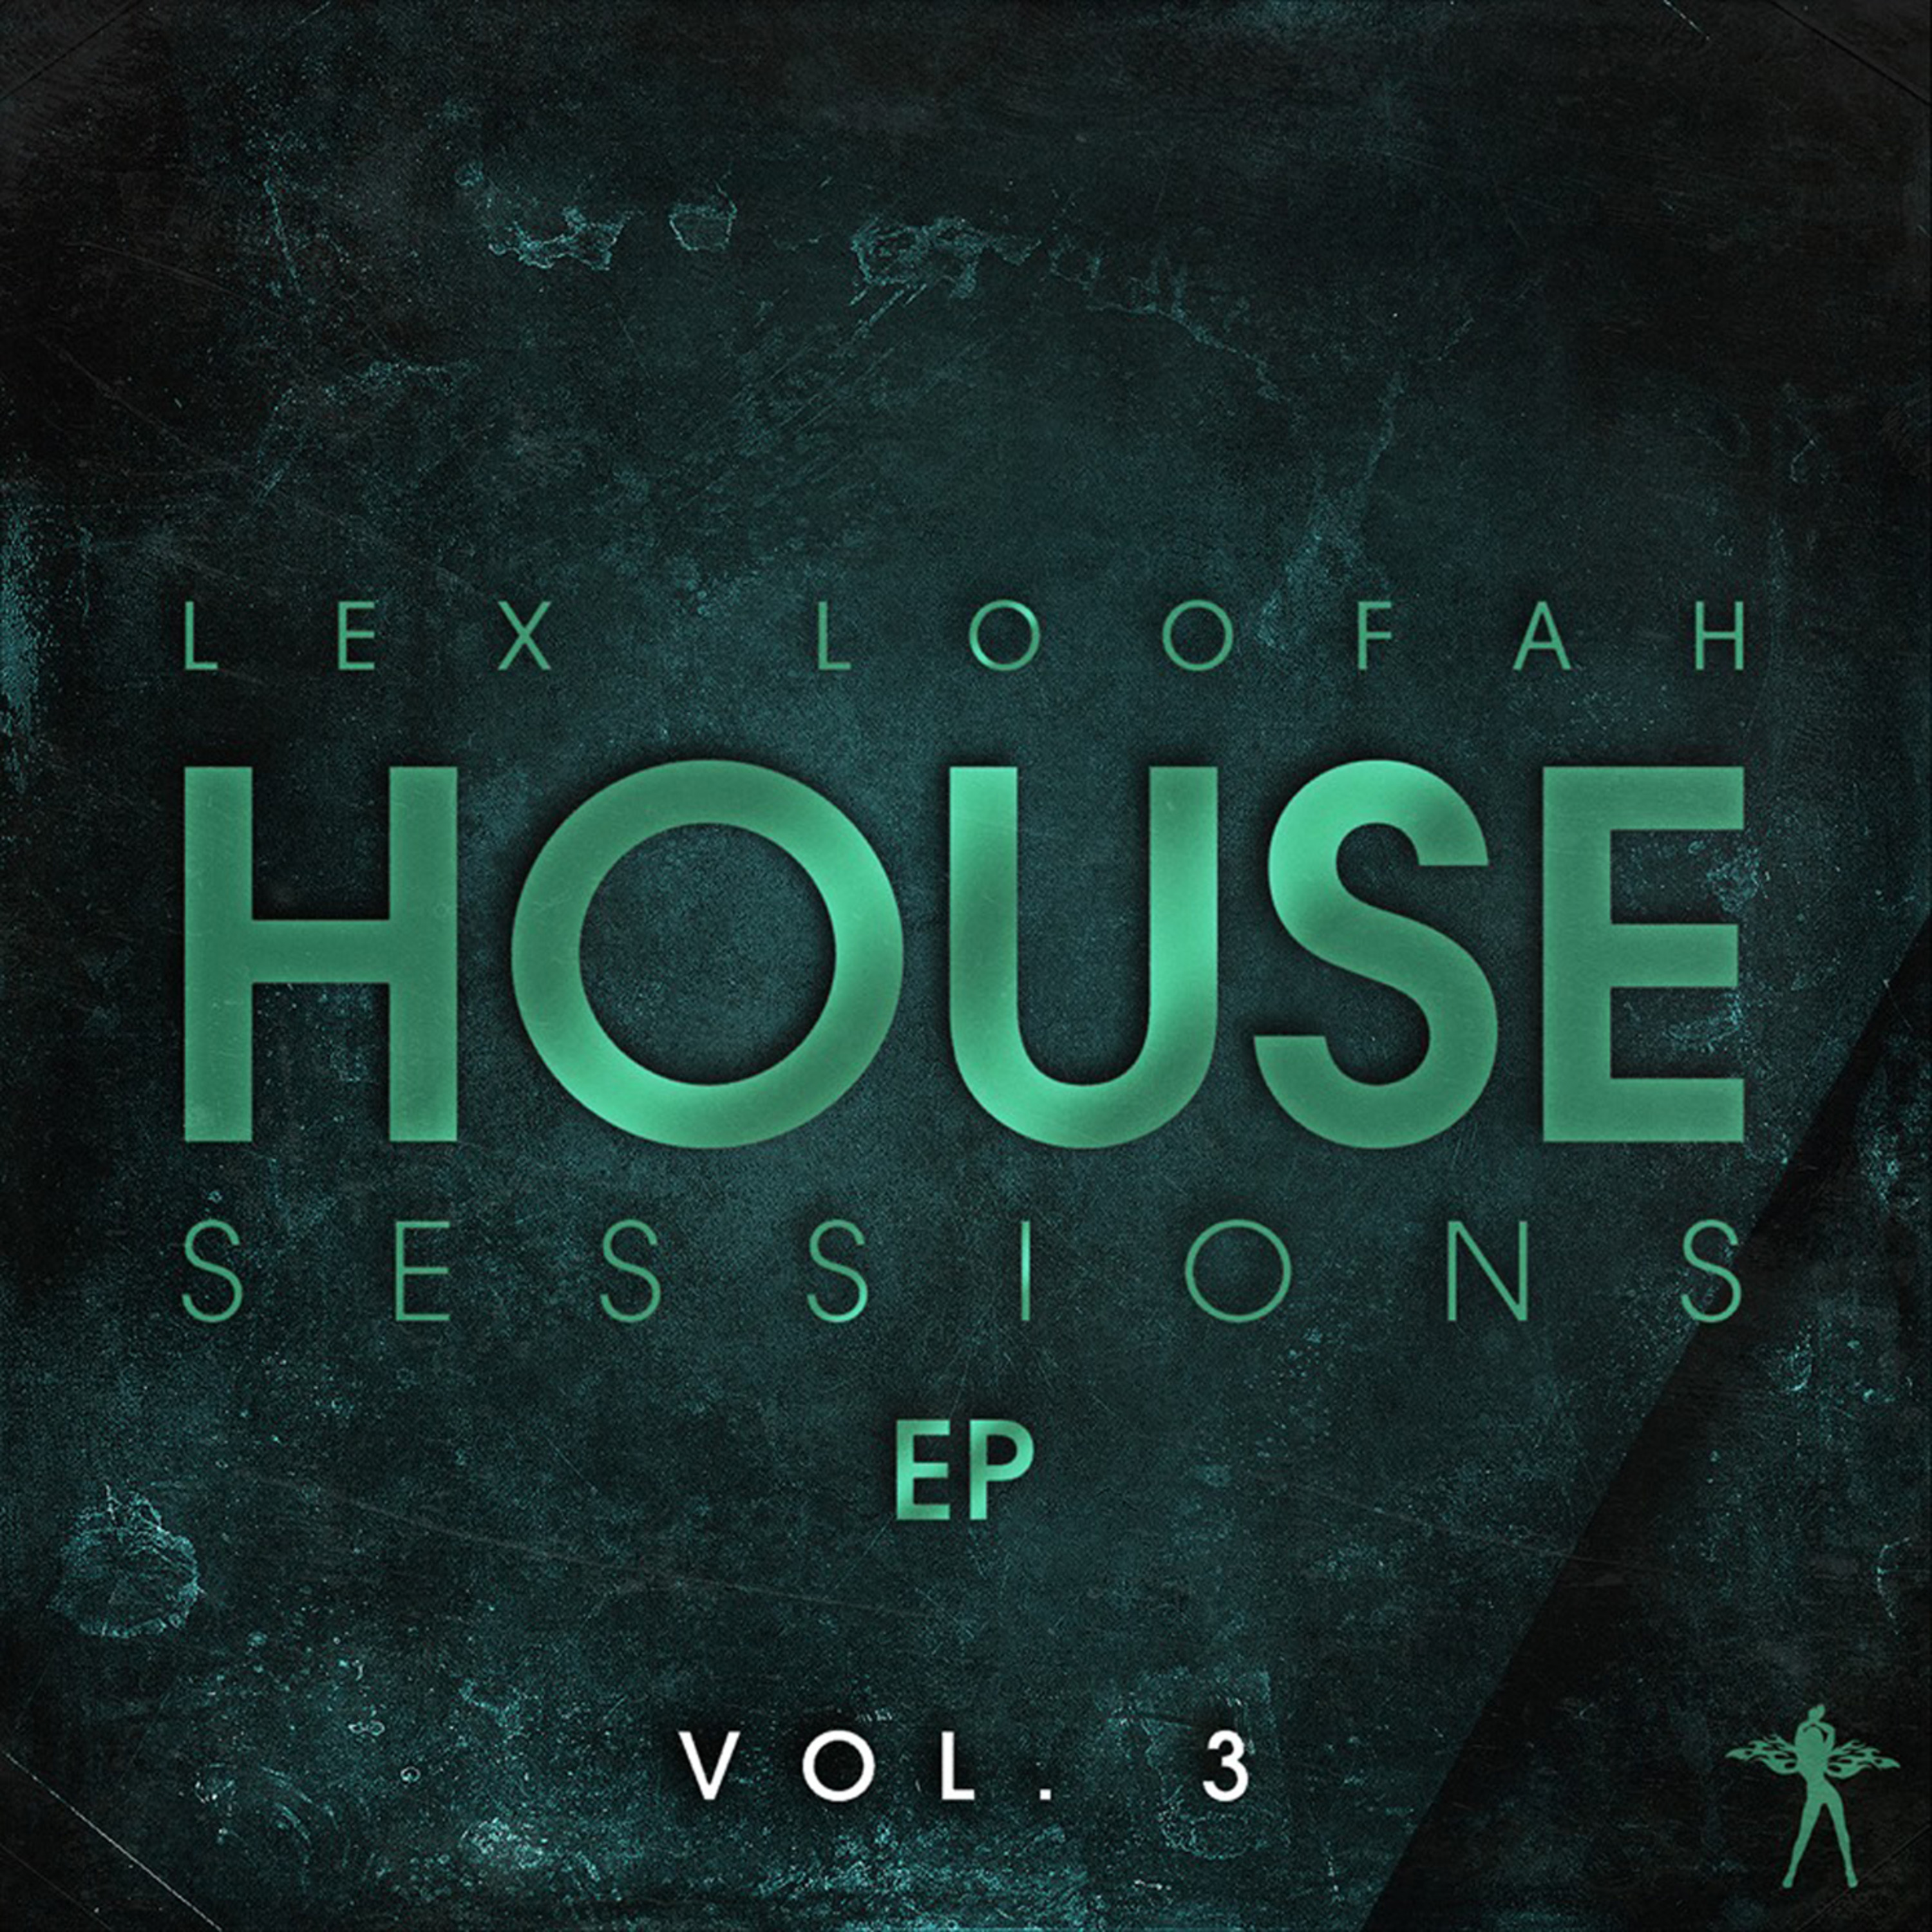 The House Sessions EP Volume 3